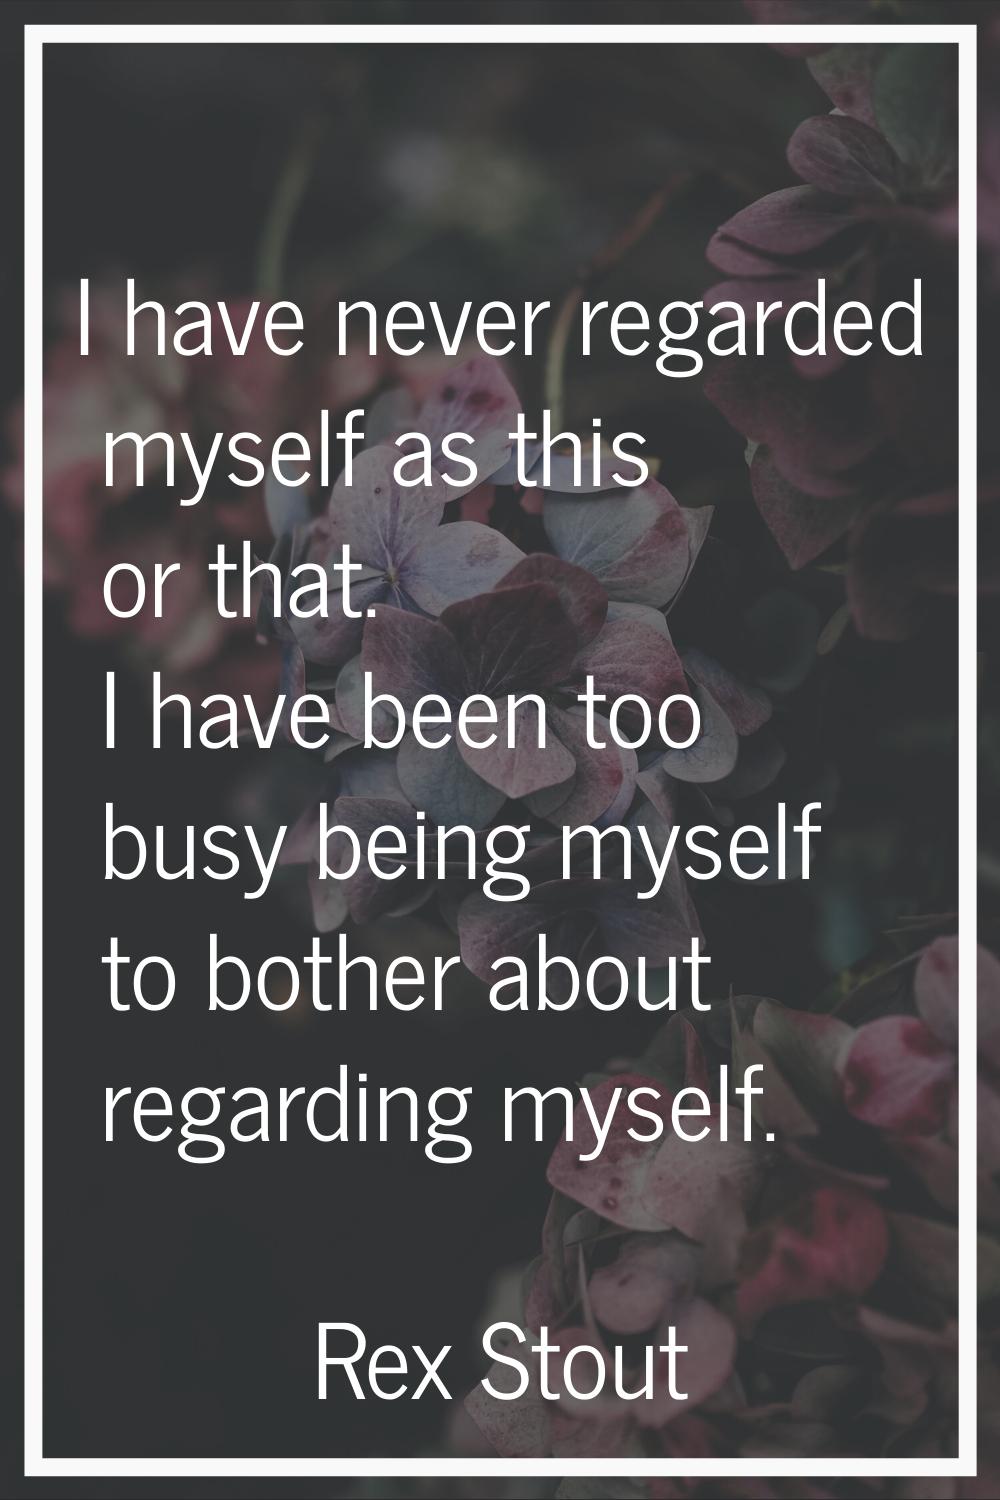 I have never regarded myself as this or that. I have been too busy being myself to bother about reg